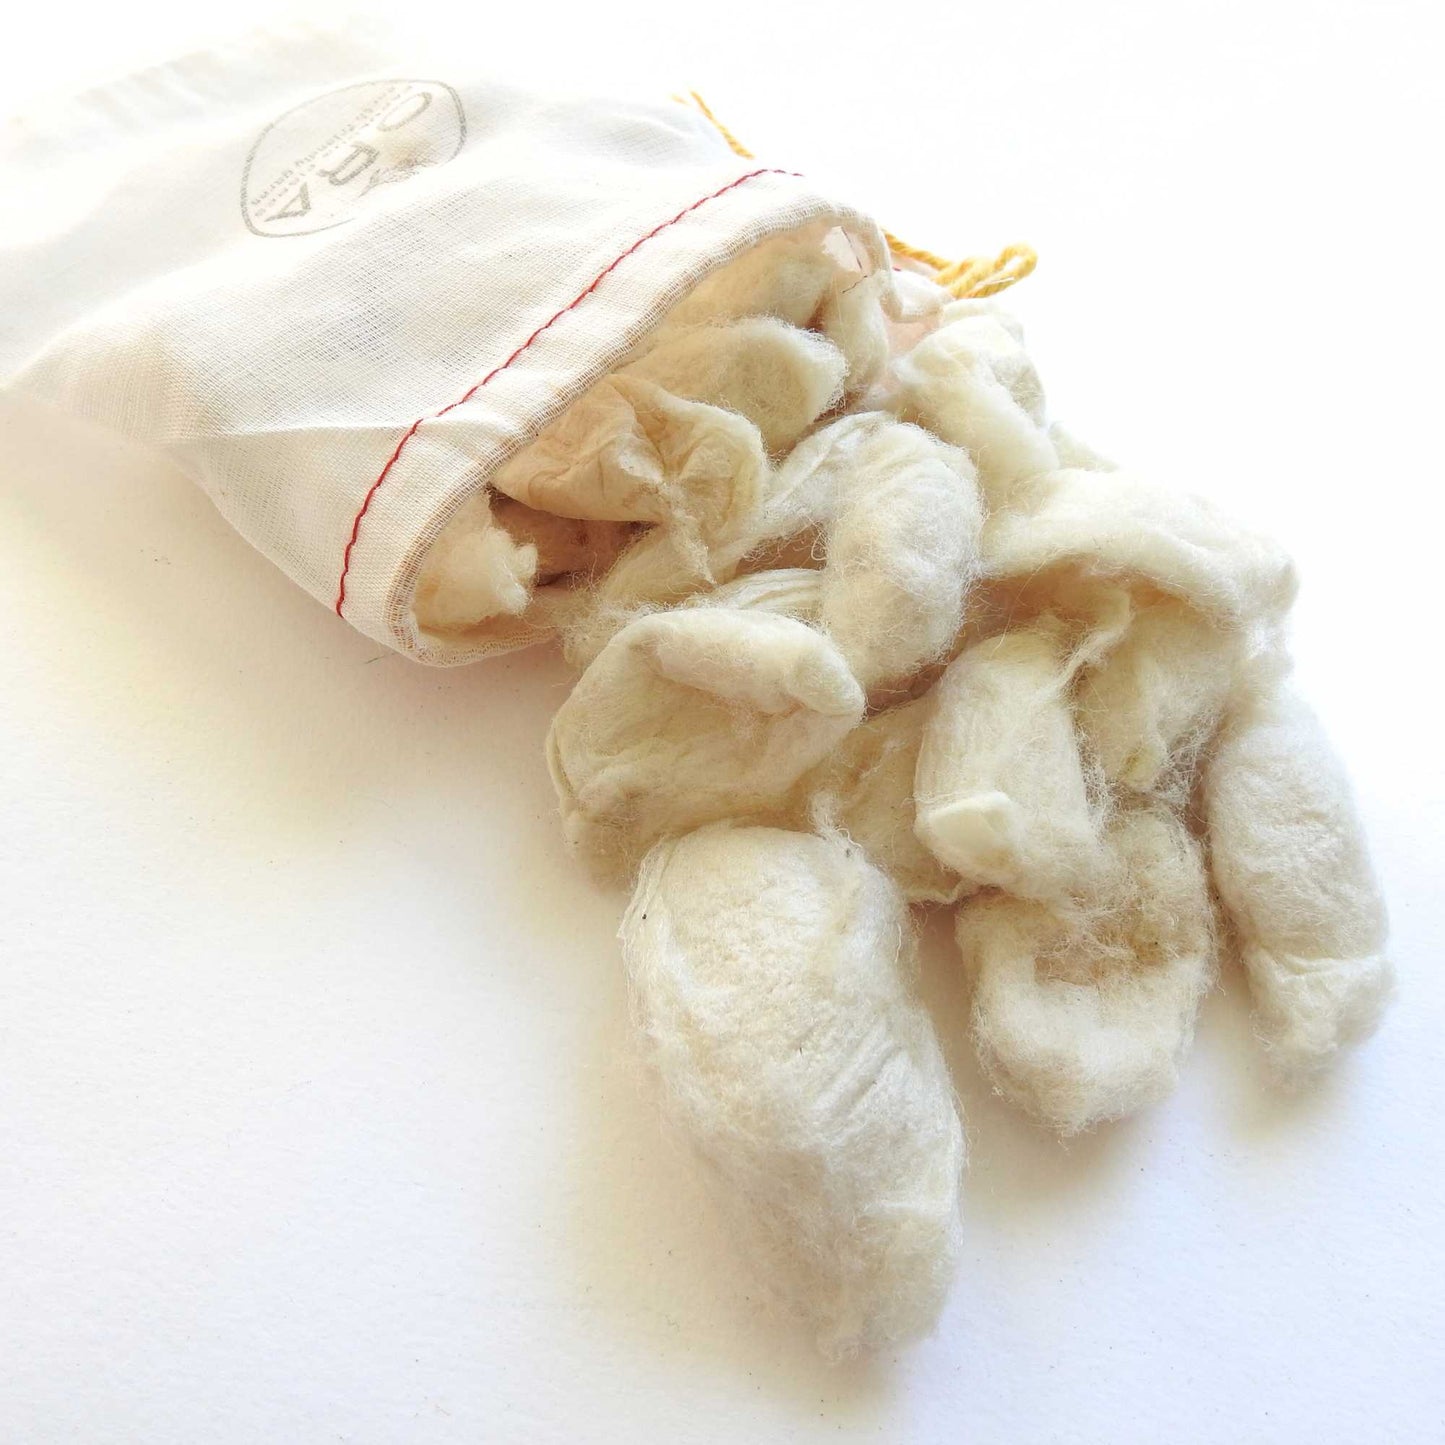 eri white silk cocoons for stitching, mixed media, felting, collage, dyeing, jewellery. cruelty free silk. sustainable